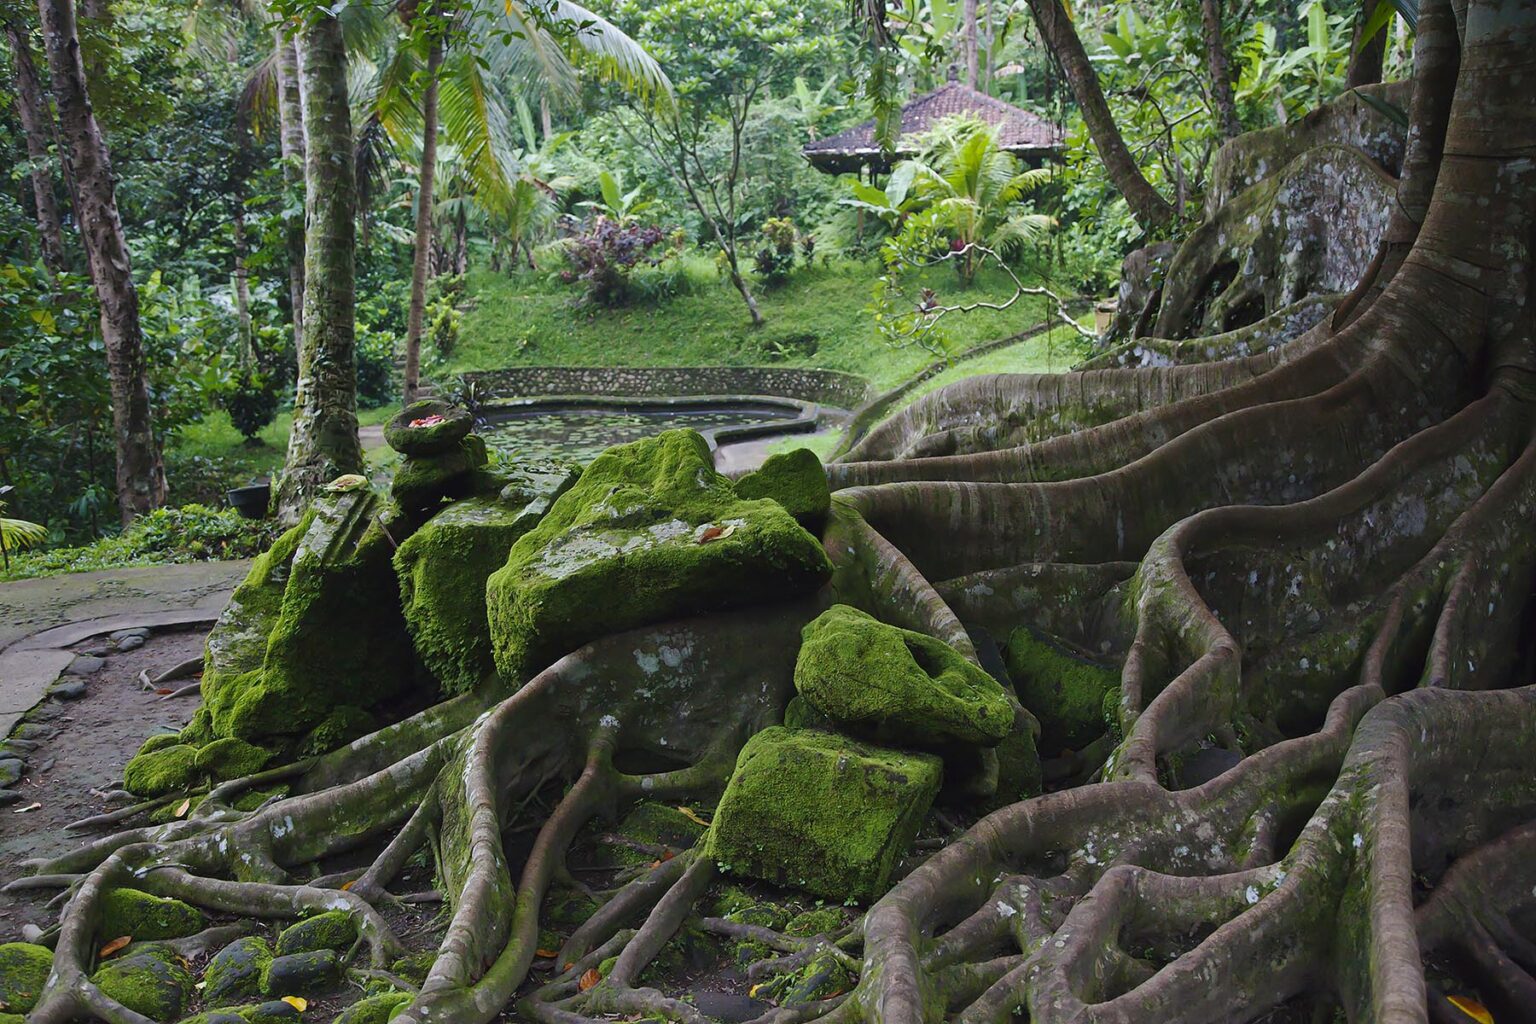 The grounds of the Hindu shrine GOA GAJAH also known as the ELEPHANT CAVE, 9th CenTury - UBUD, BALI, INDONESIA